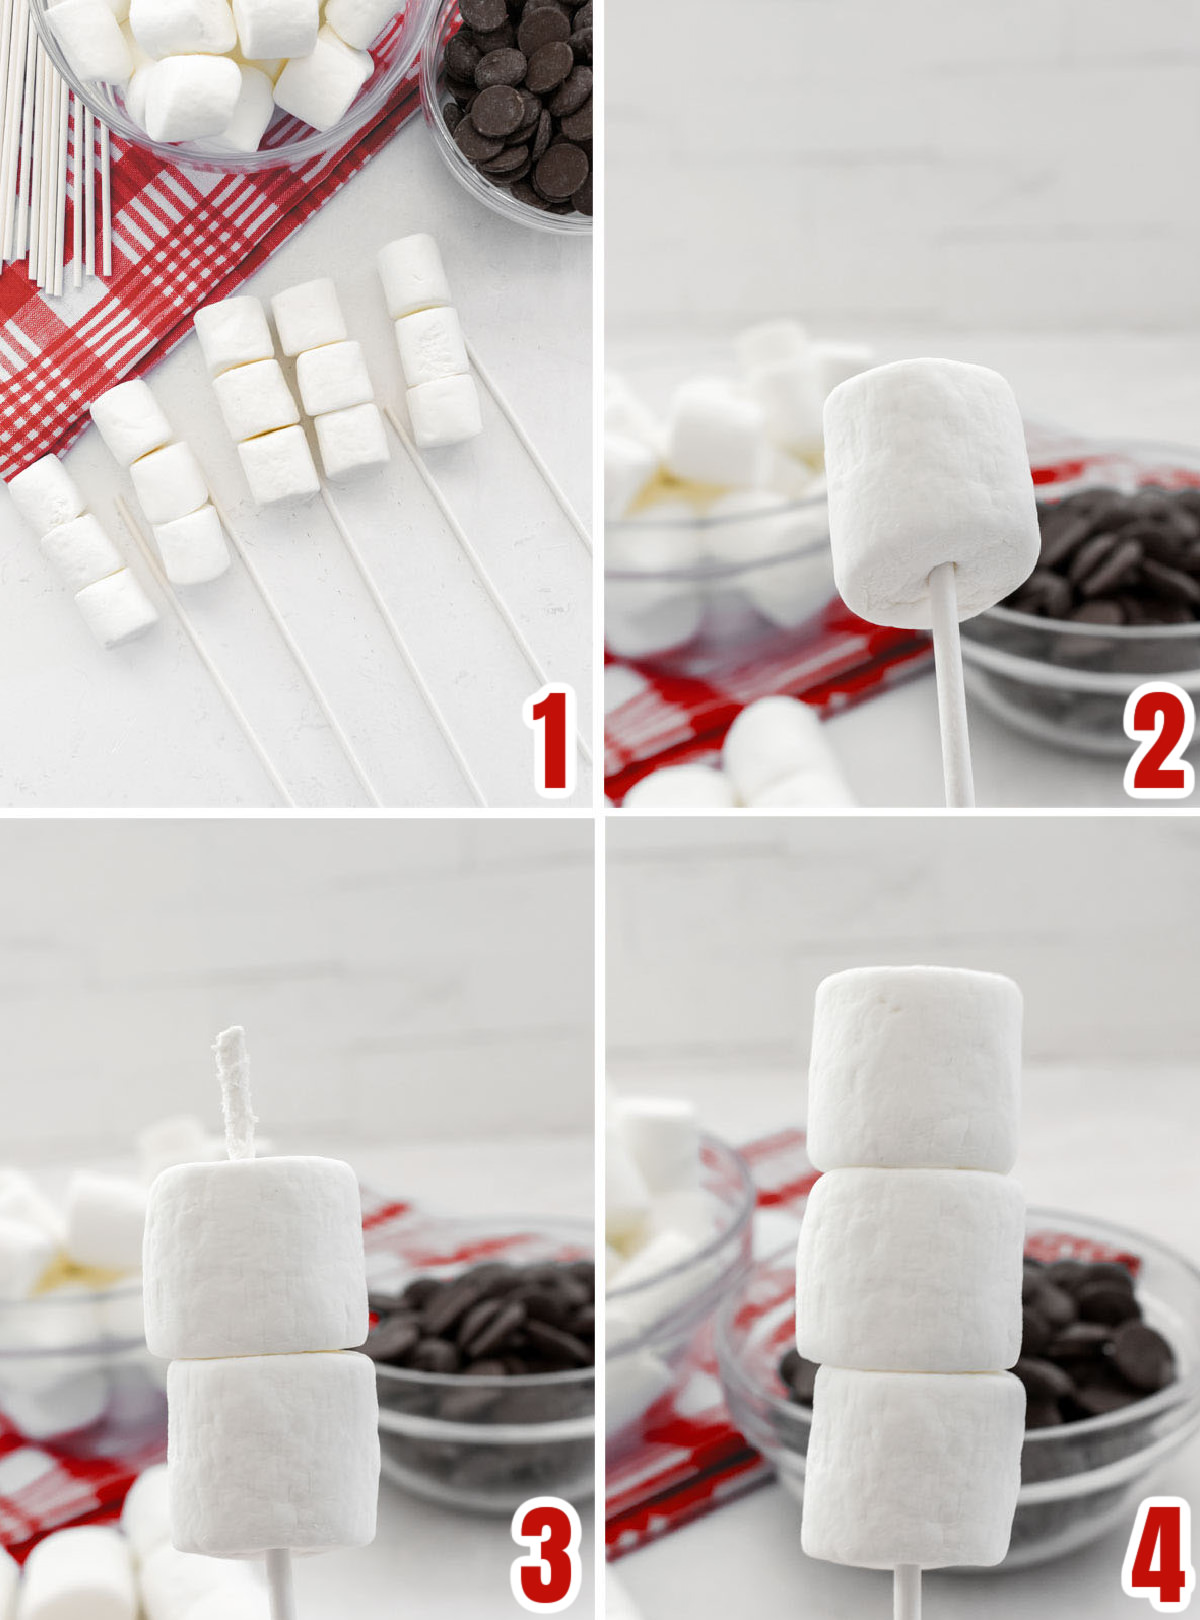 Collage image showing the steps for placing the Marshmallows on the lollipop sticks.